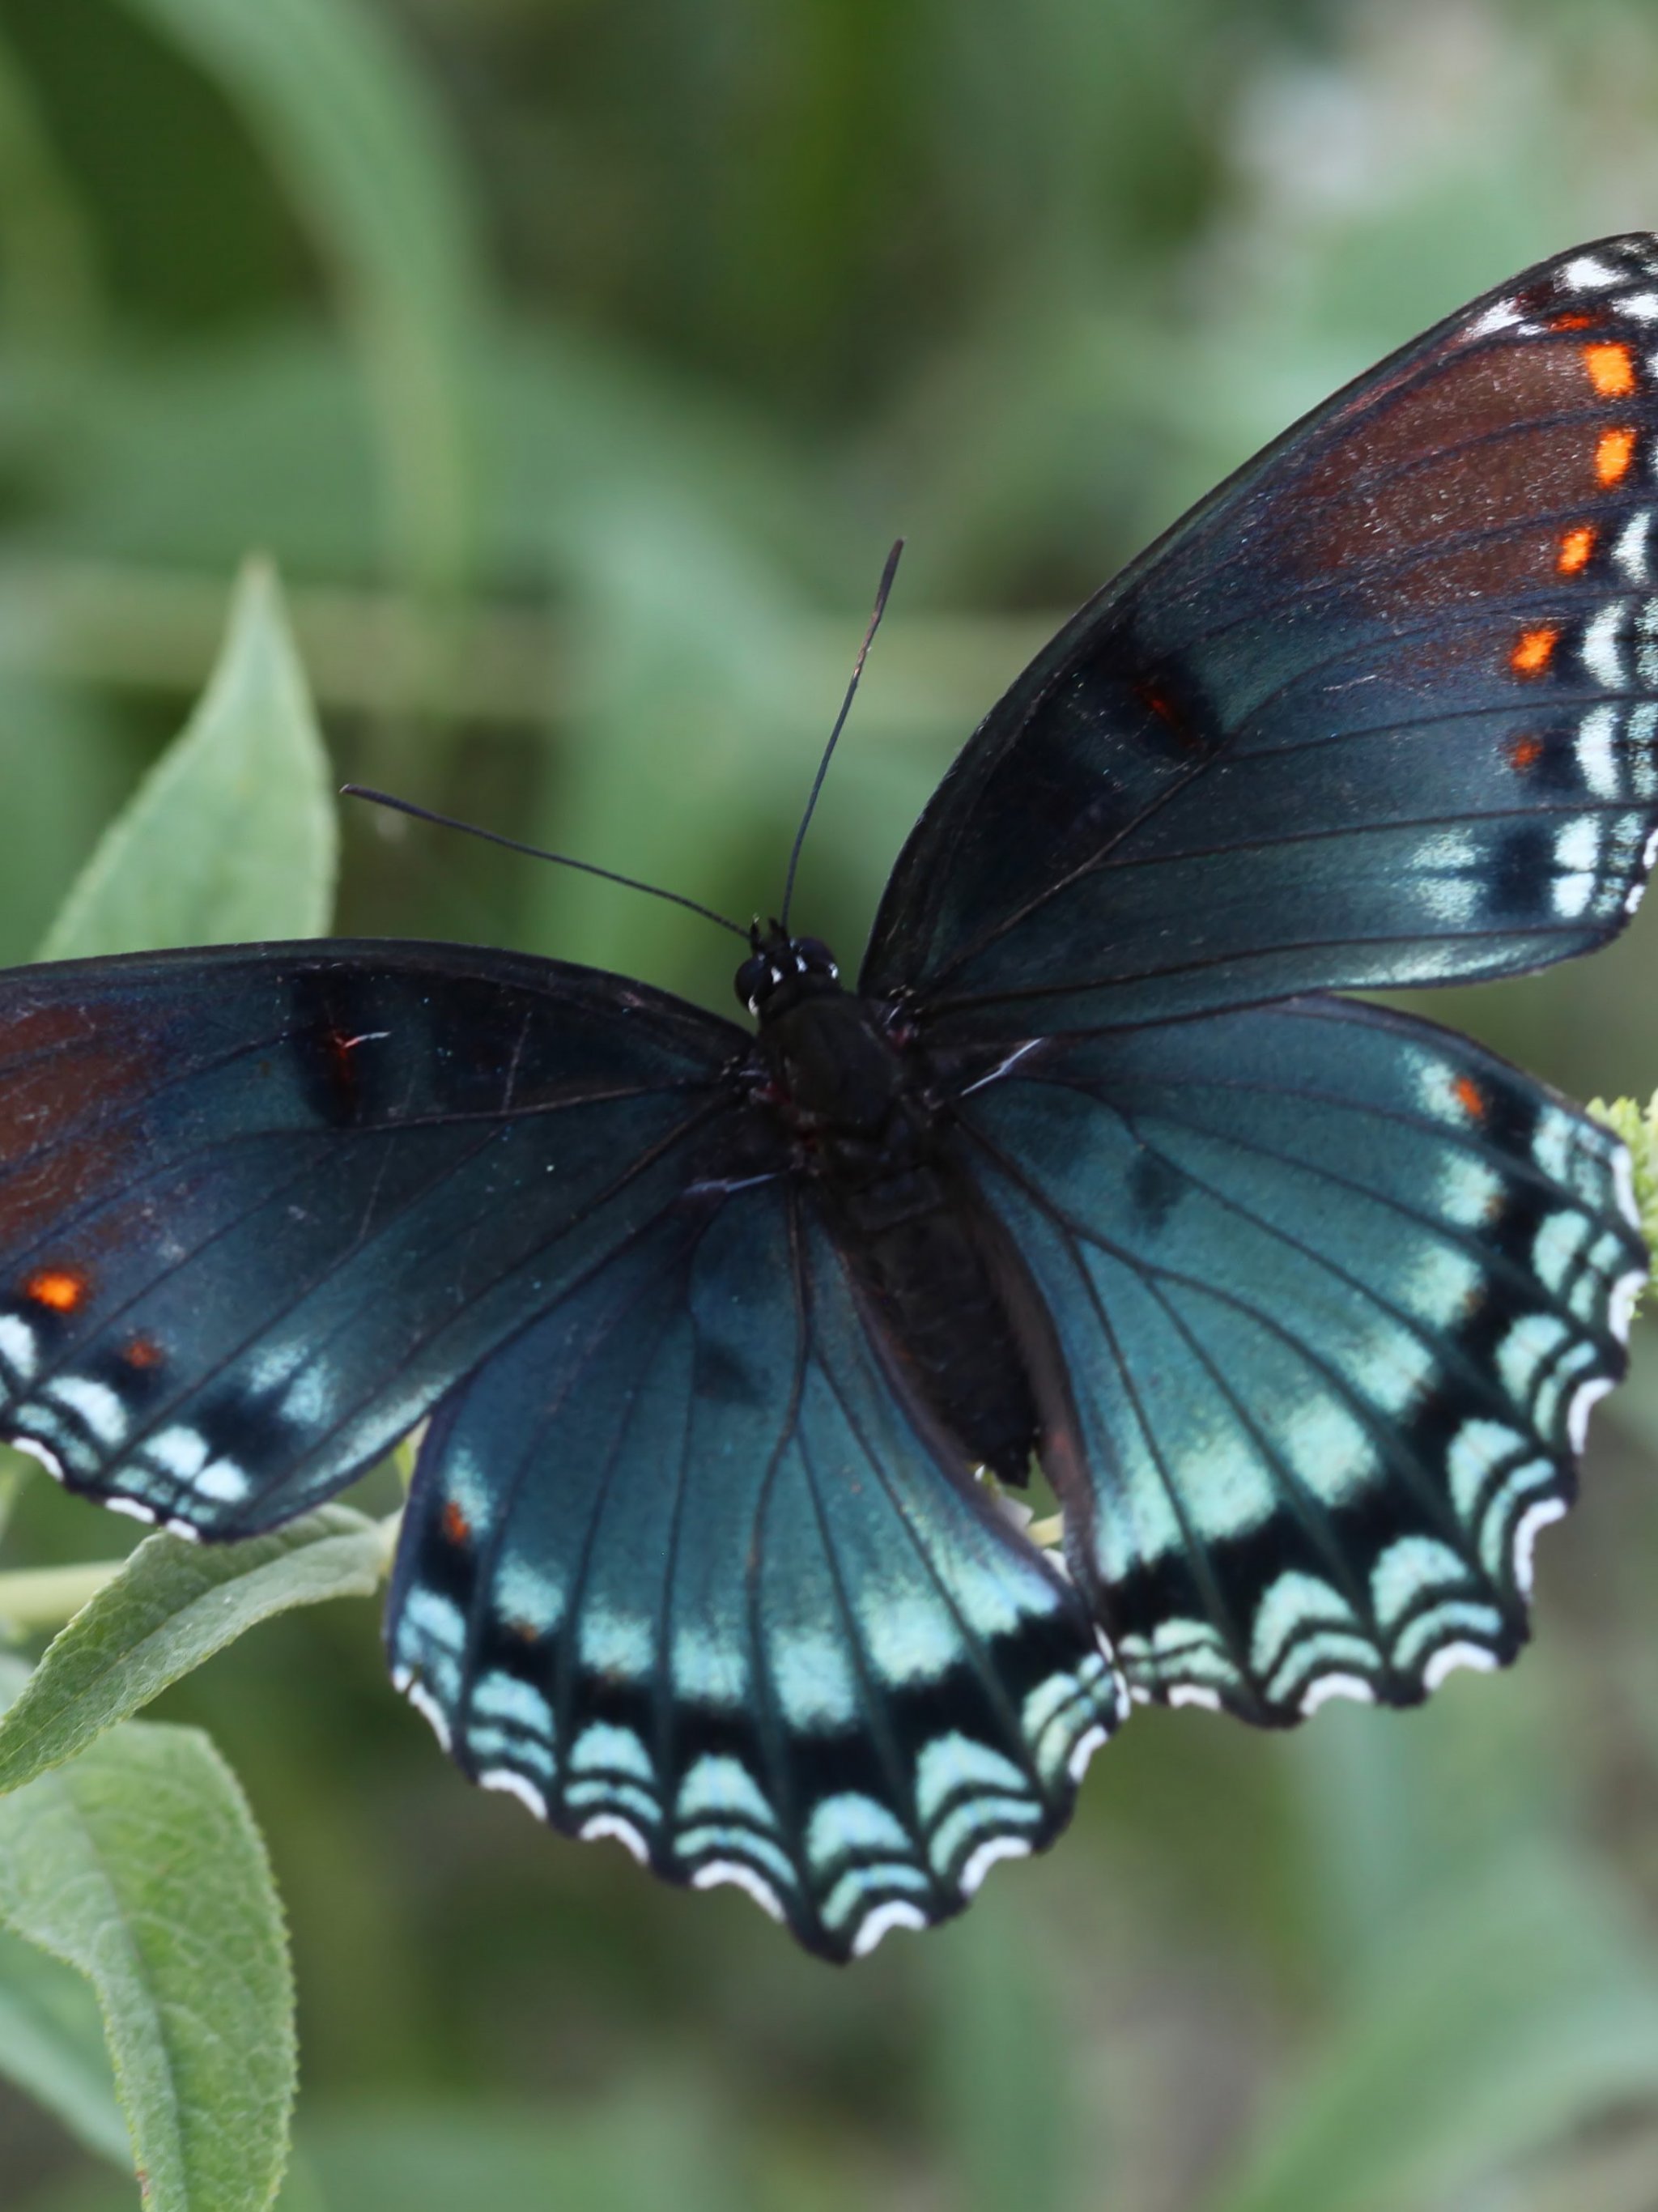 Red Spotted Purple Butterfly Wallpaper - iPhone, Android & Desktop  Backgrounds